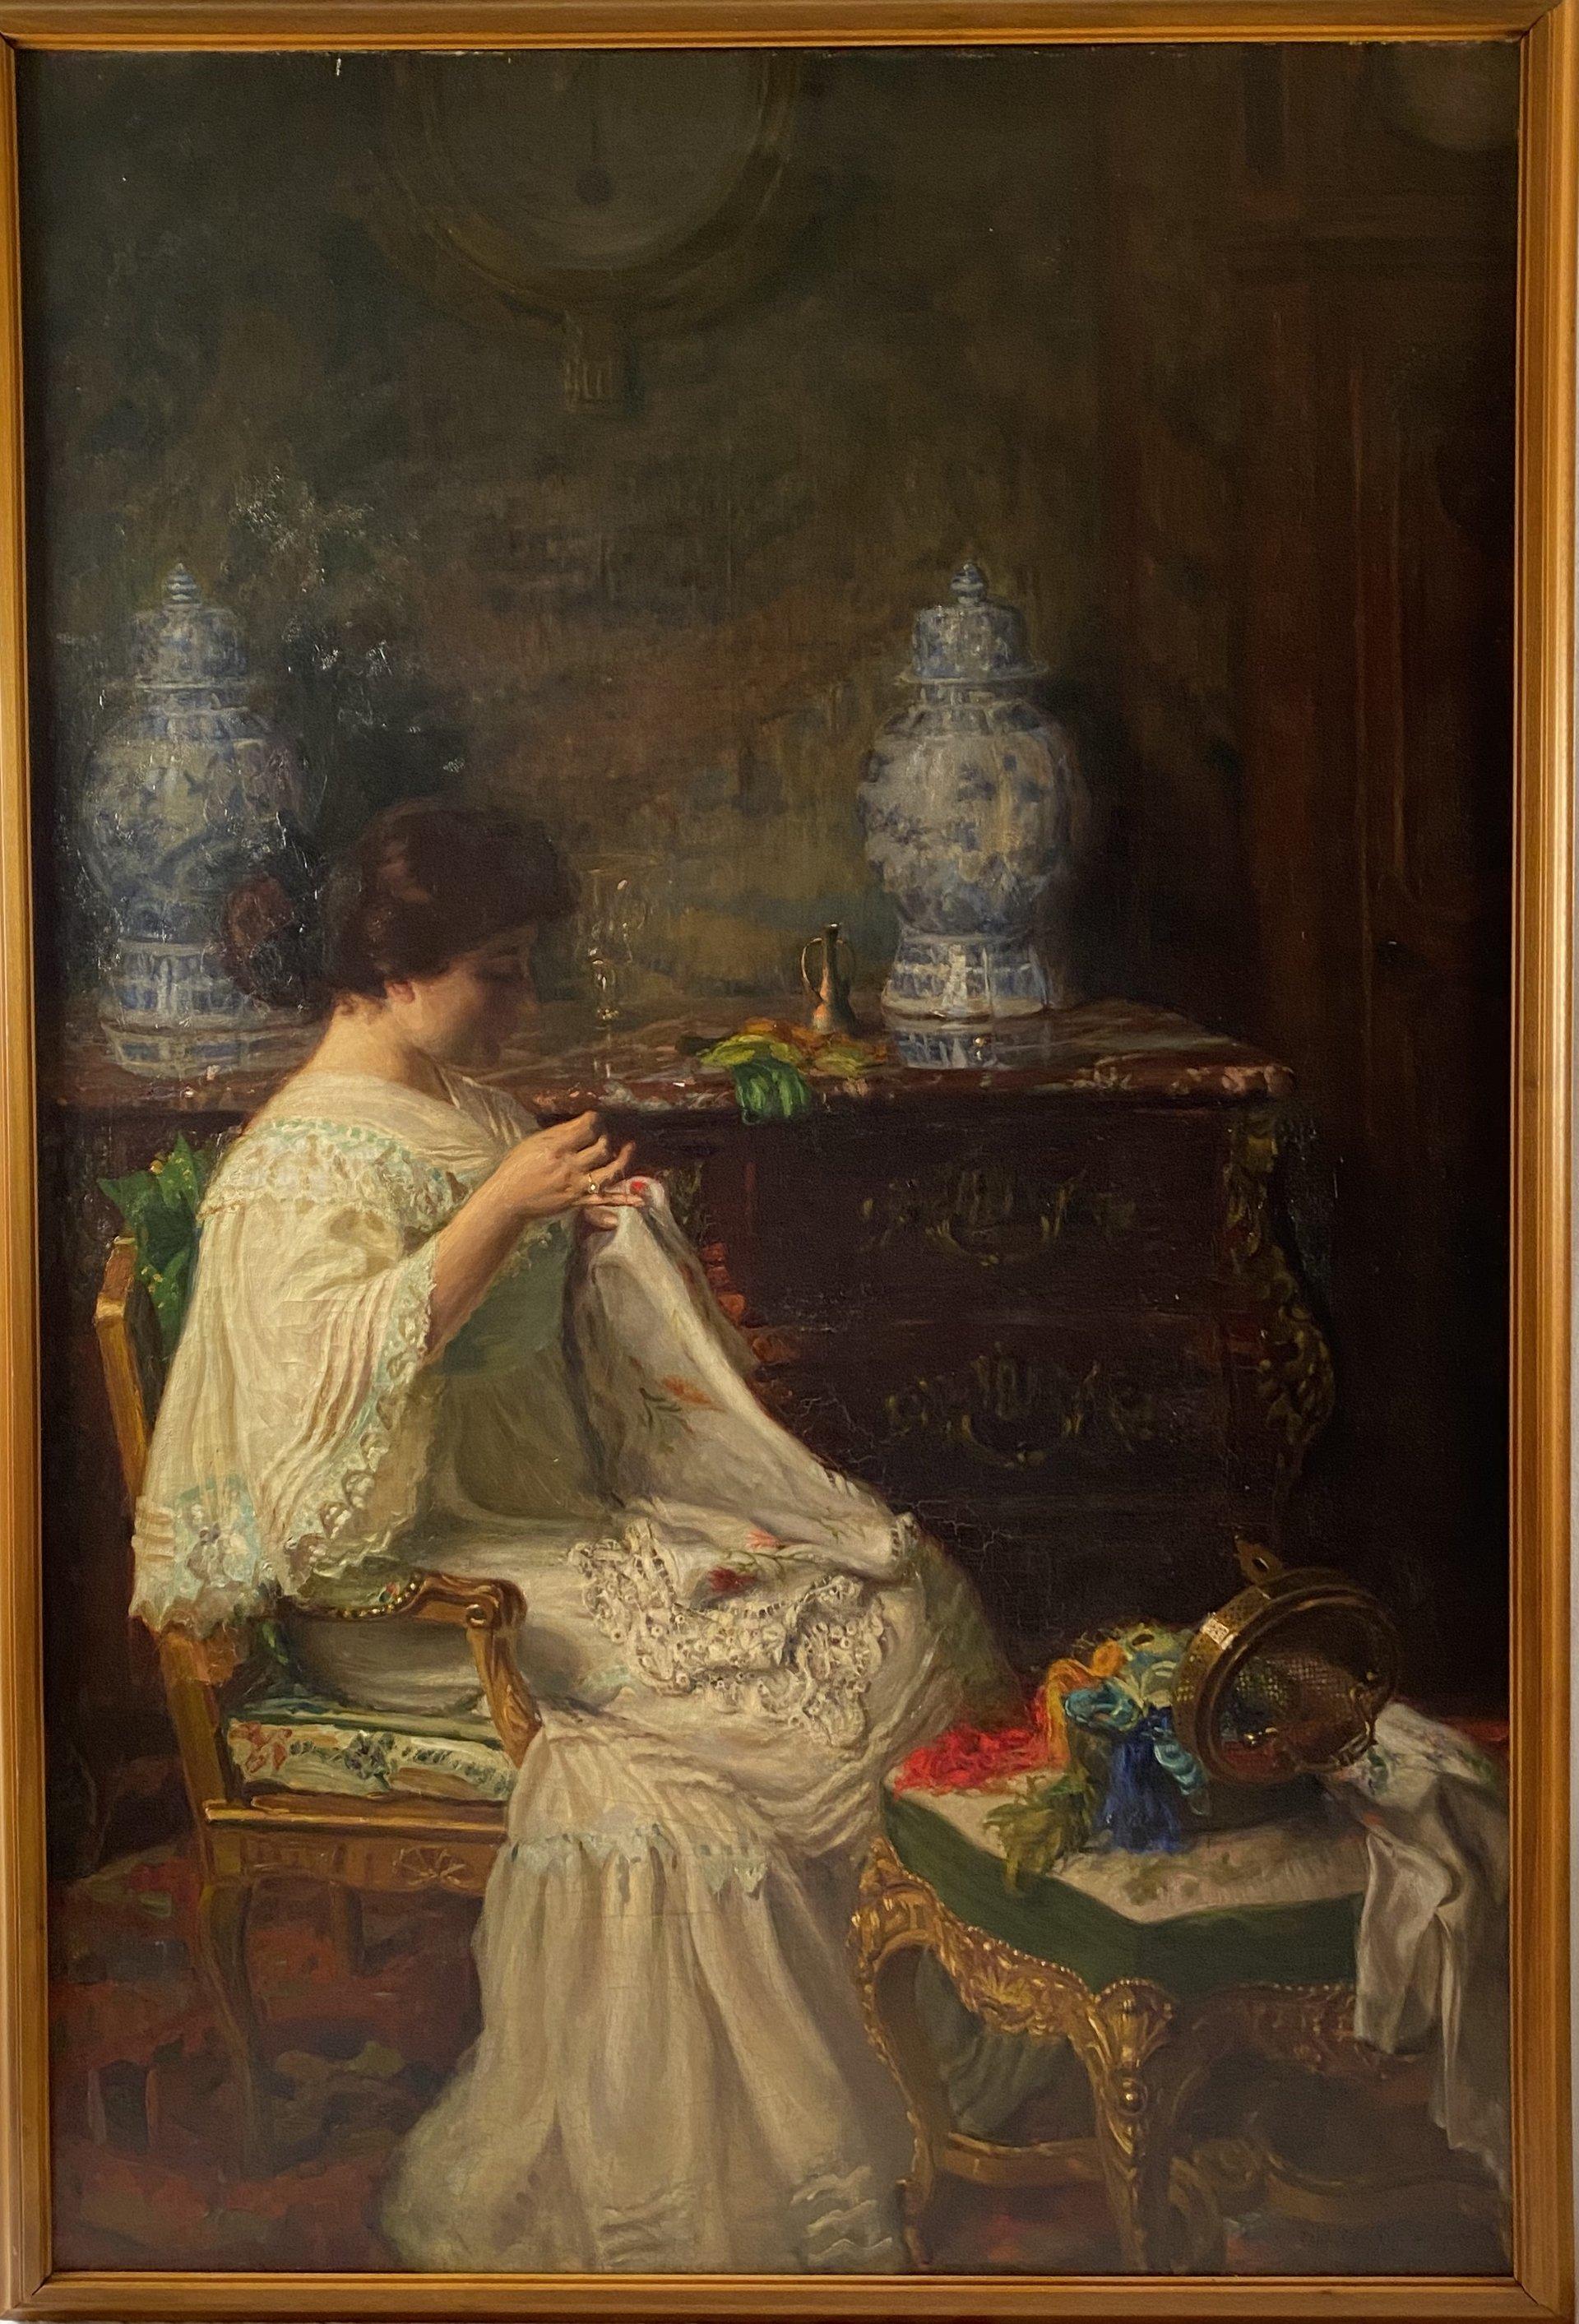 SEAMSTRESS IN INTERIOR (1907) BY PAUL ÉDOUARD DELIGNY - Painting by Paul Édouard Deligny